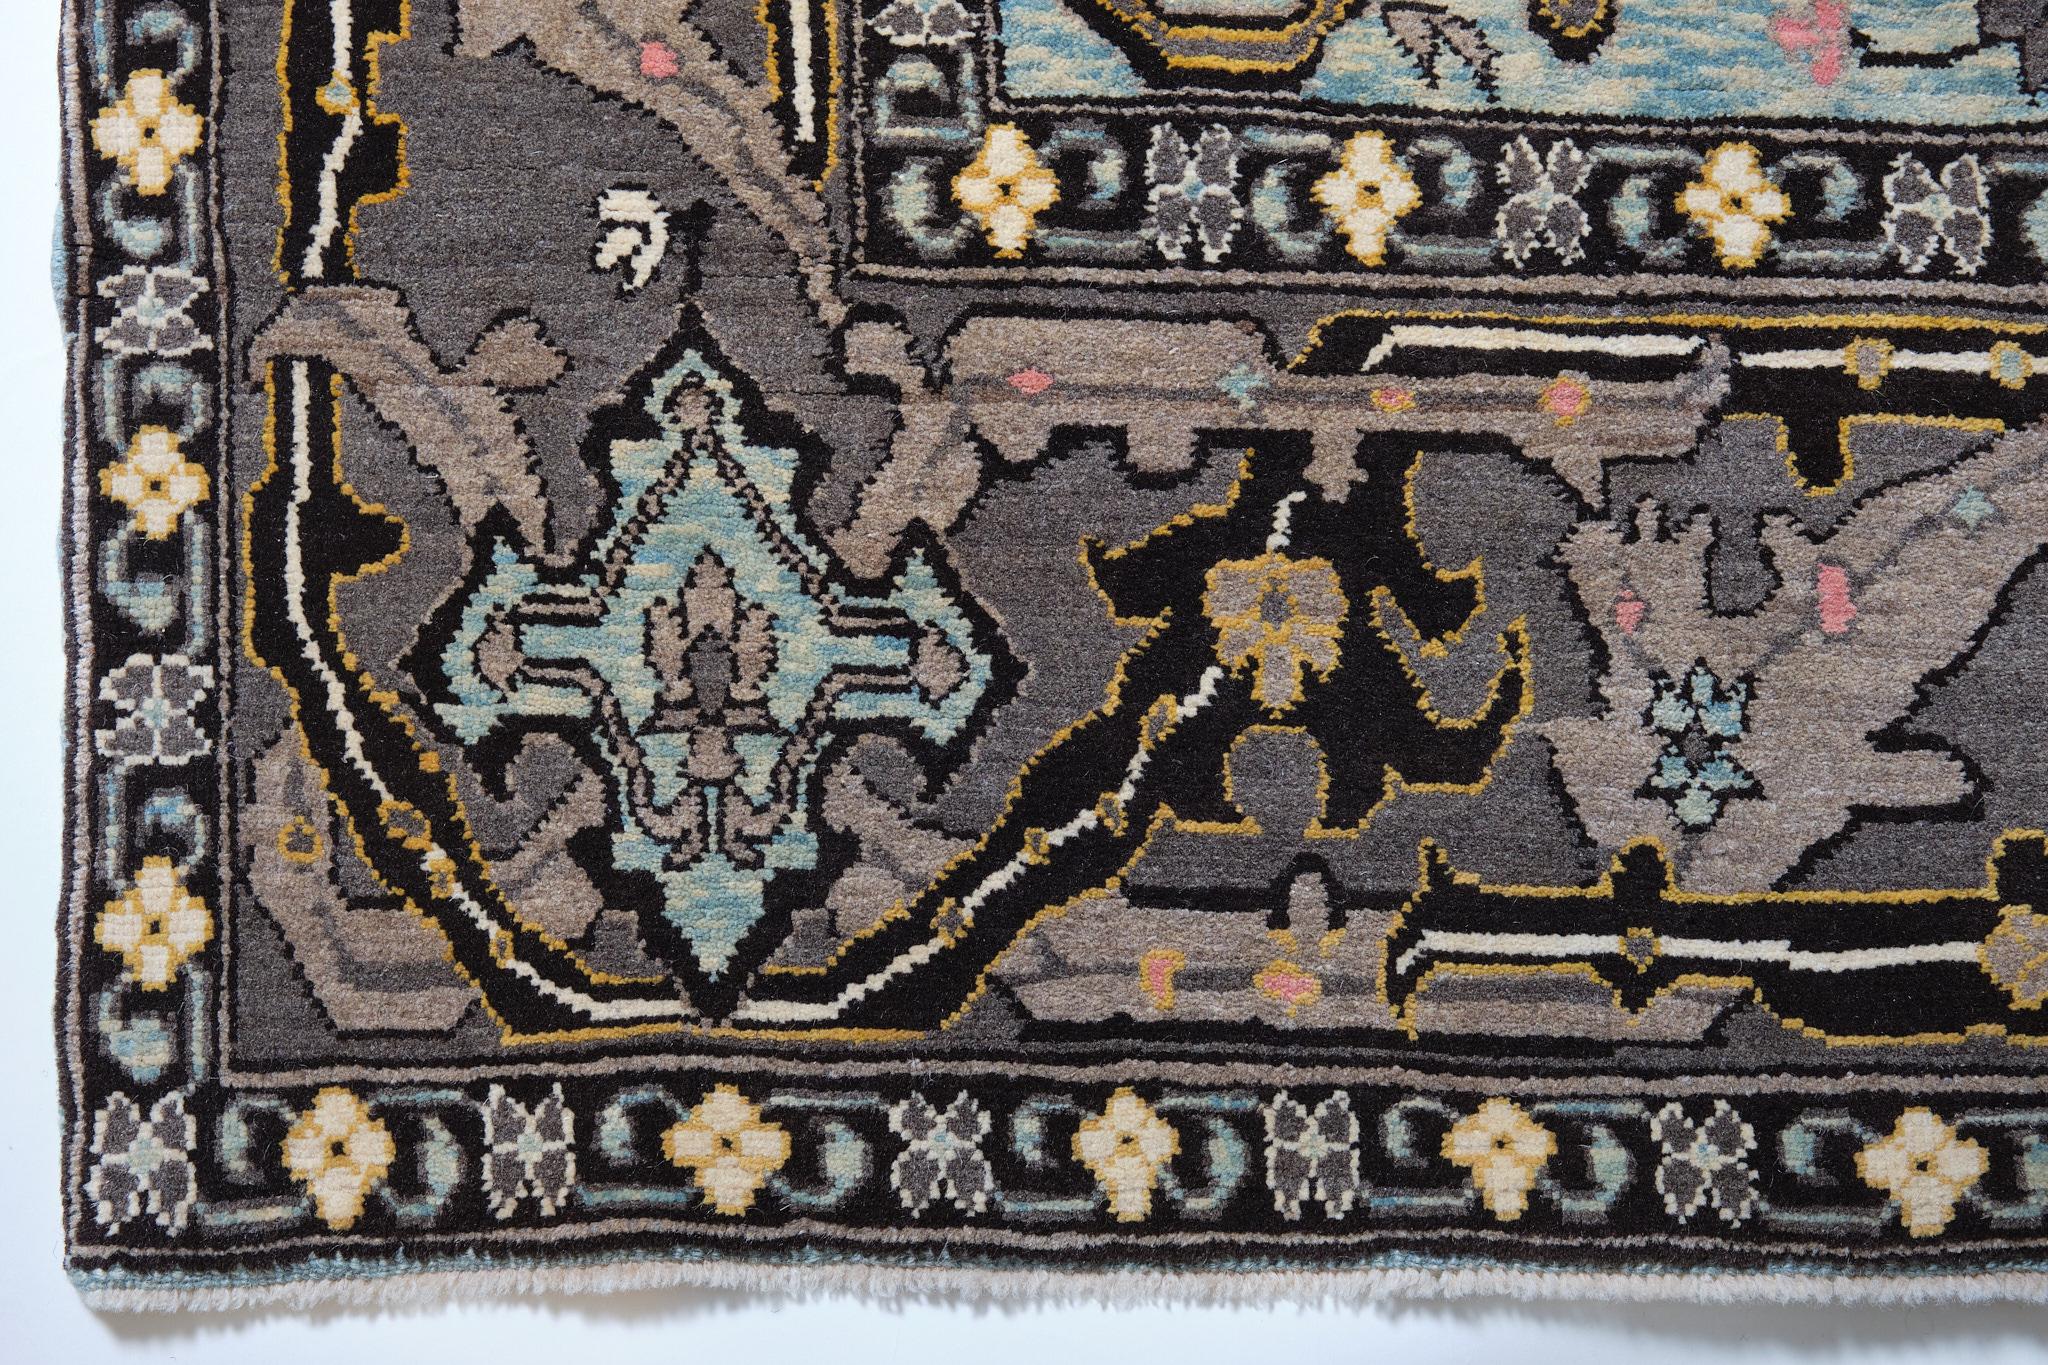 The source of rug comes from the book Antique rugs of Kurdistan A Historical Legacy of Woven Art, James D. Burns, 2002 nr.33. This is a fine Kurdish workshop rug with split-palmette and trefoil arabesque patterns designed mid-19th century rug from